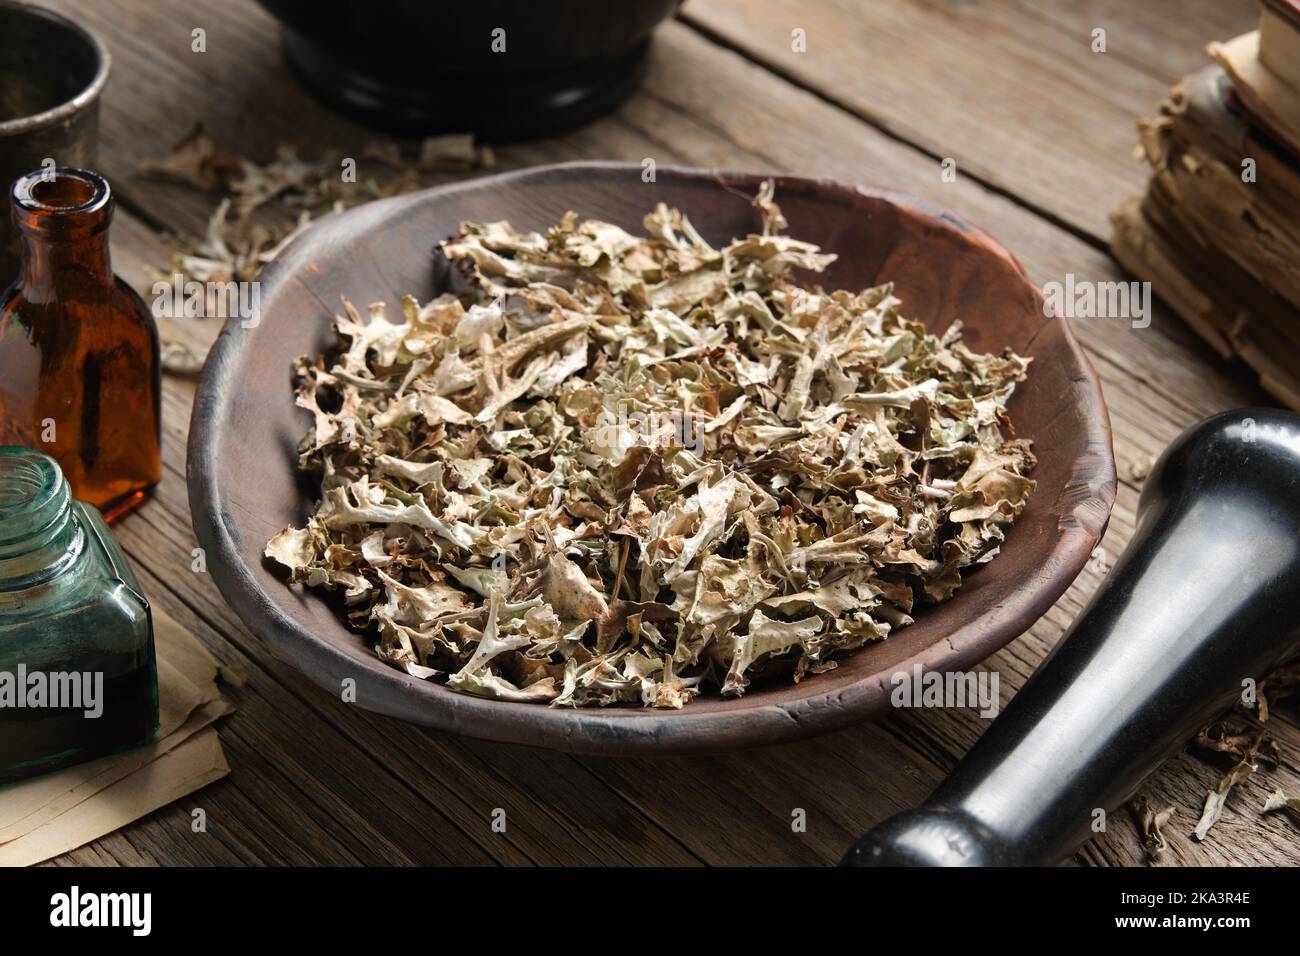 Dried Iceland moss for making healthy herbal cough tea. Bottle of icelandic moss syrup or tincture, natural cough medicine. Alternative herbal medicin Stock Photo